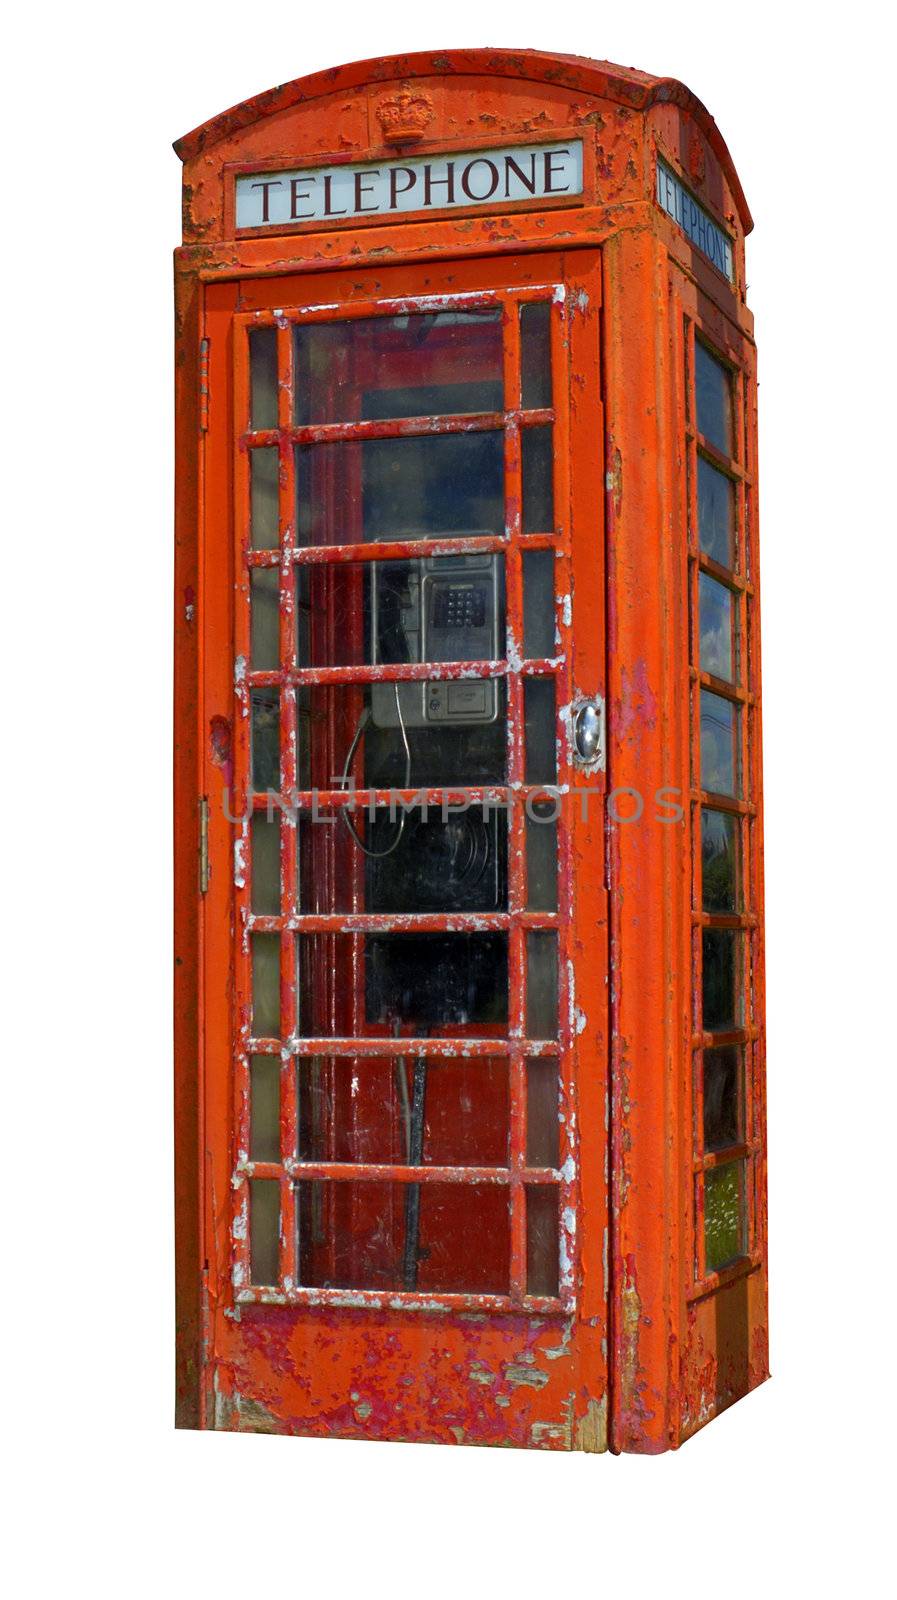 A grungy telephone box (Clipping path included) by Bateleur